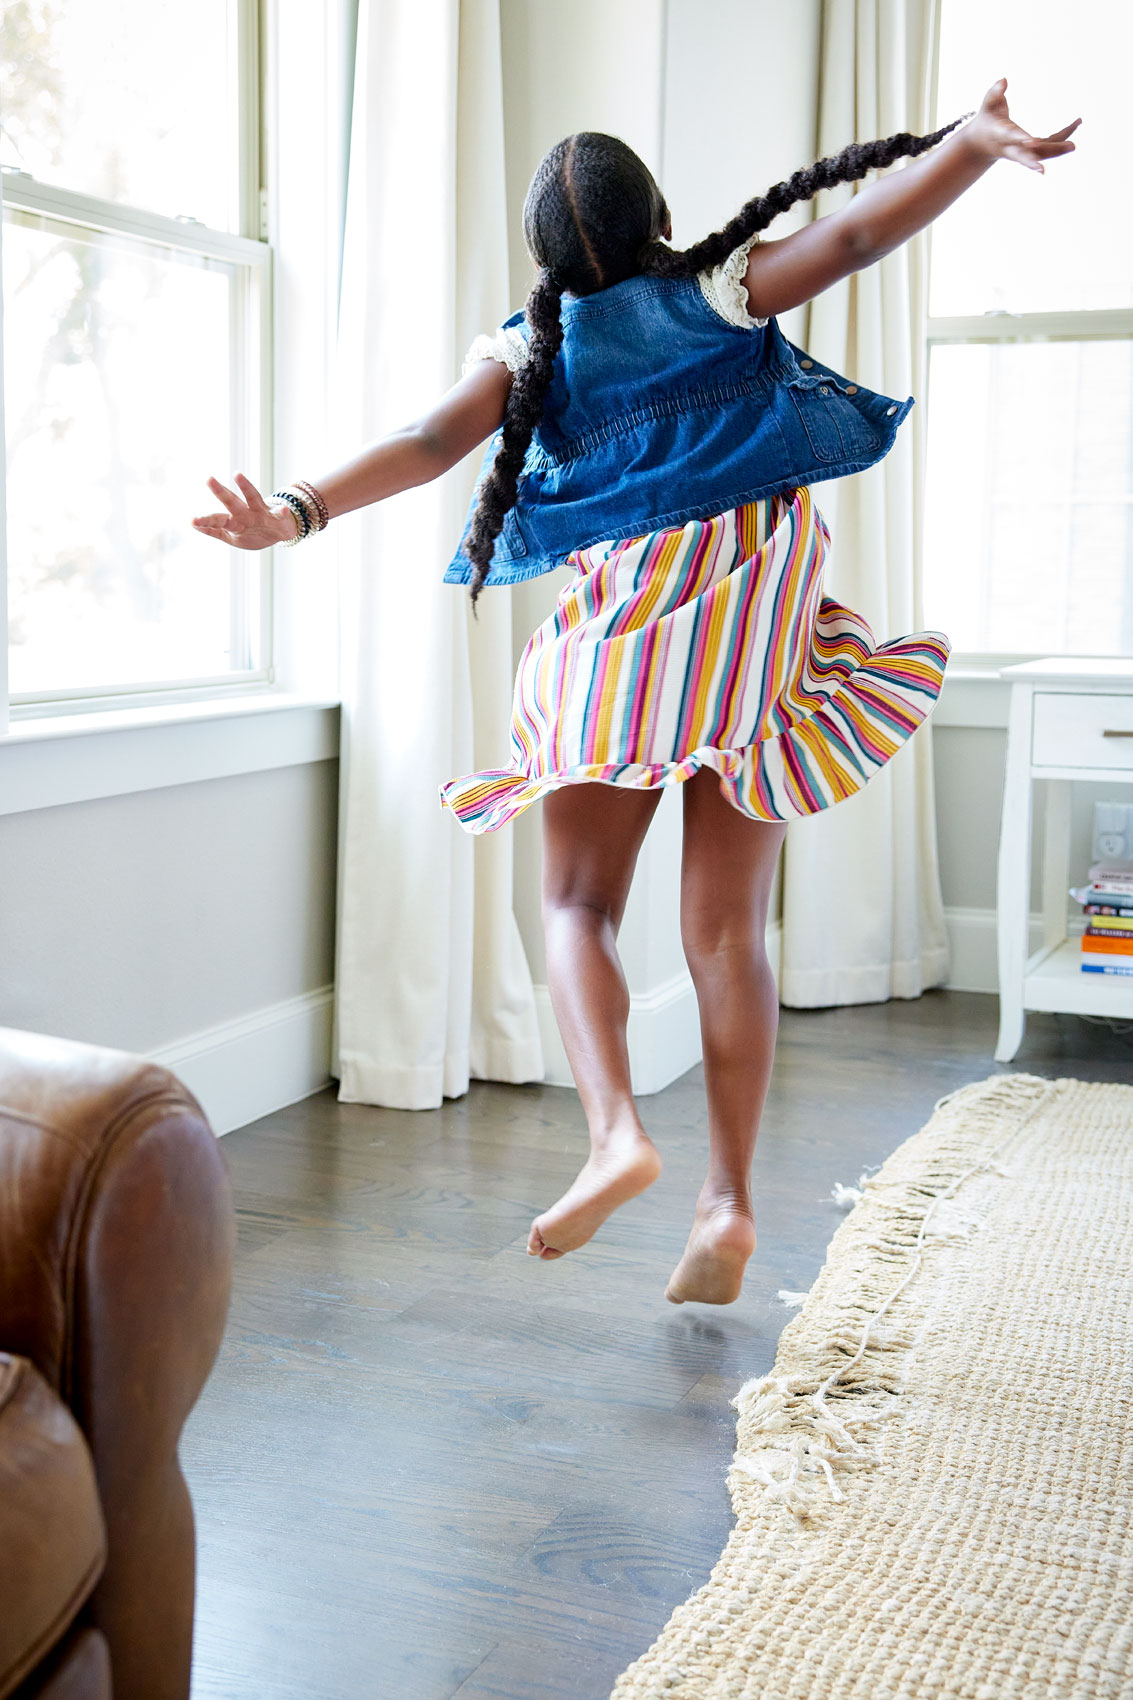 Indoor lifestyle photograph of a young woman dancing in her bedroom.